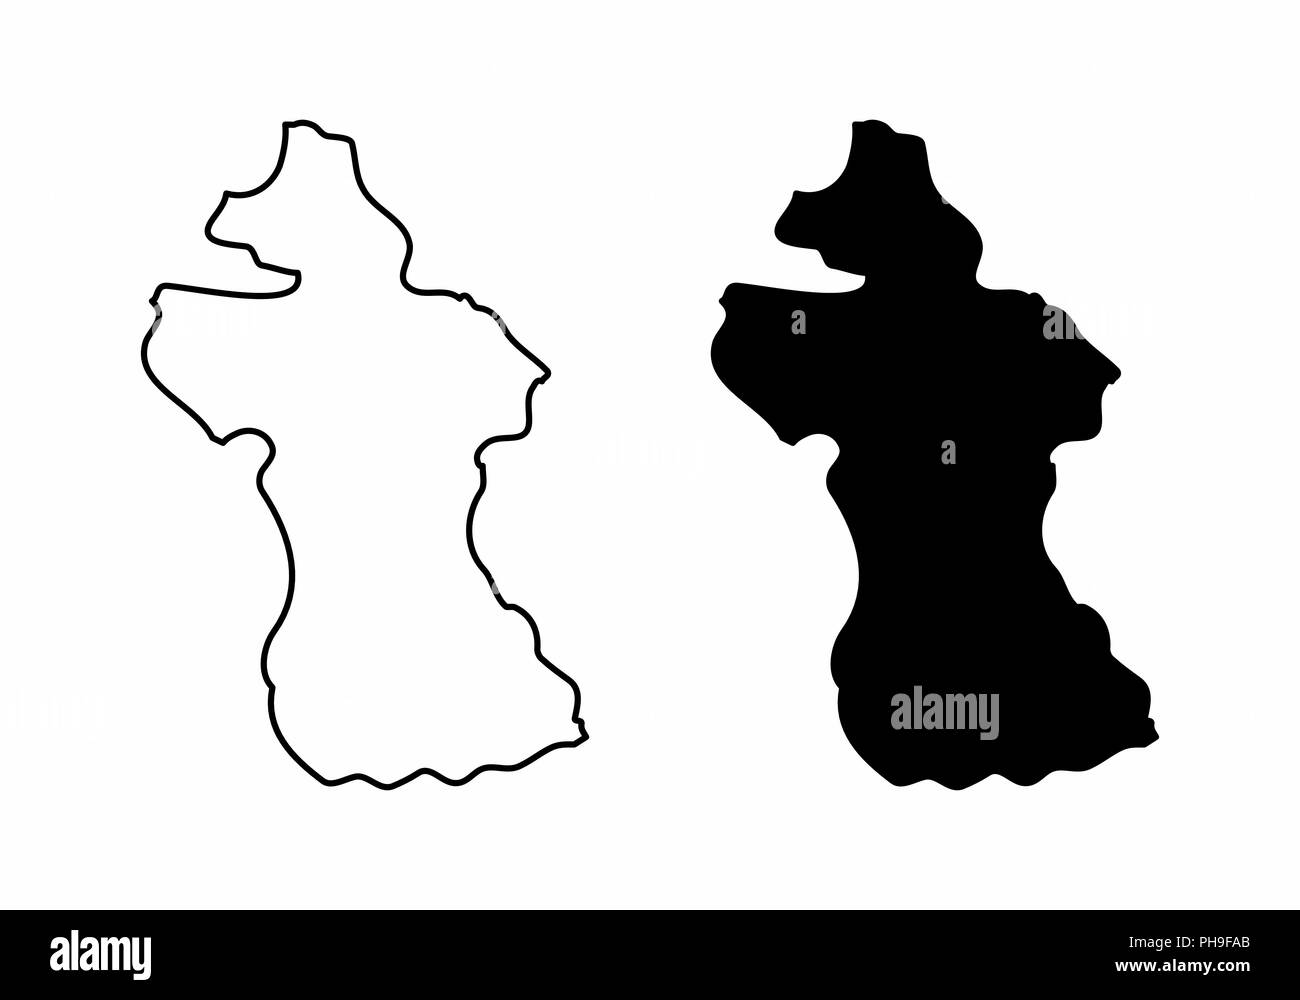 Simplified maps of Guyana. Black and white outlines. Stock Vector